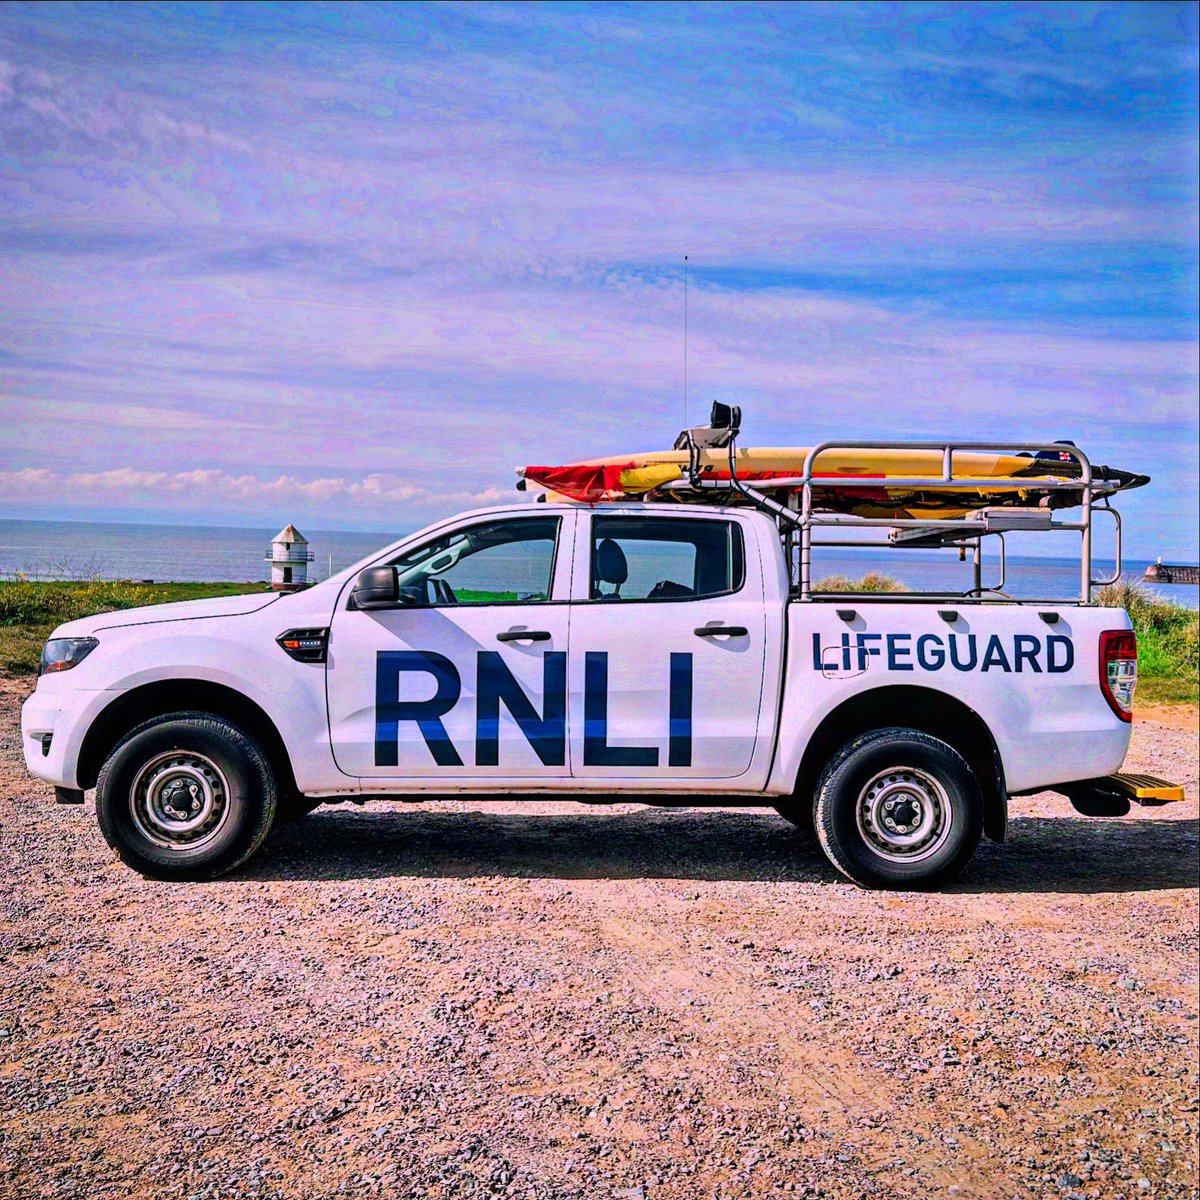 The @SouthWalesLGs are back and already on Trecco & Sandy Bay (aka Coney Beach) and soon to return further down the coast at @RestBaySLSC HQ. Regardless of beach - always swim between the red and yellow flags. #SurfRescue #Porthcawl #Lifeguard #Bridgend #VigilanceAndService